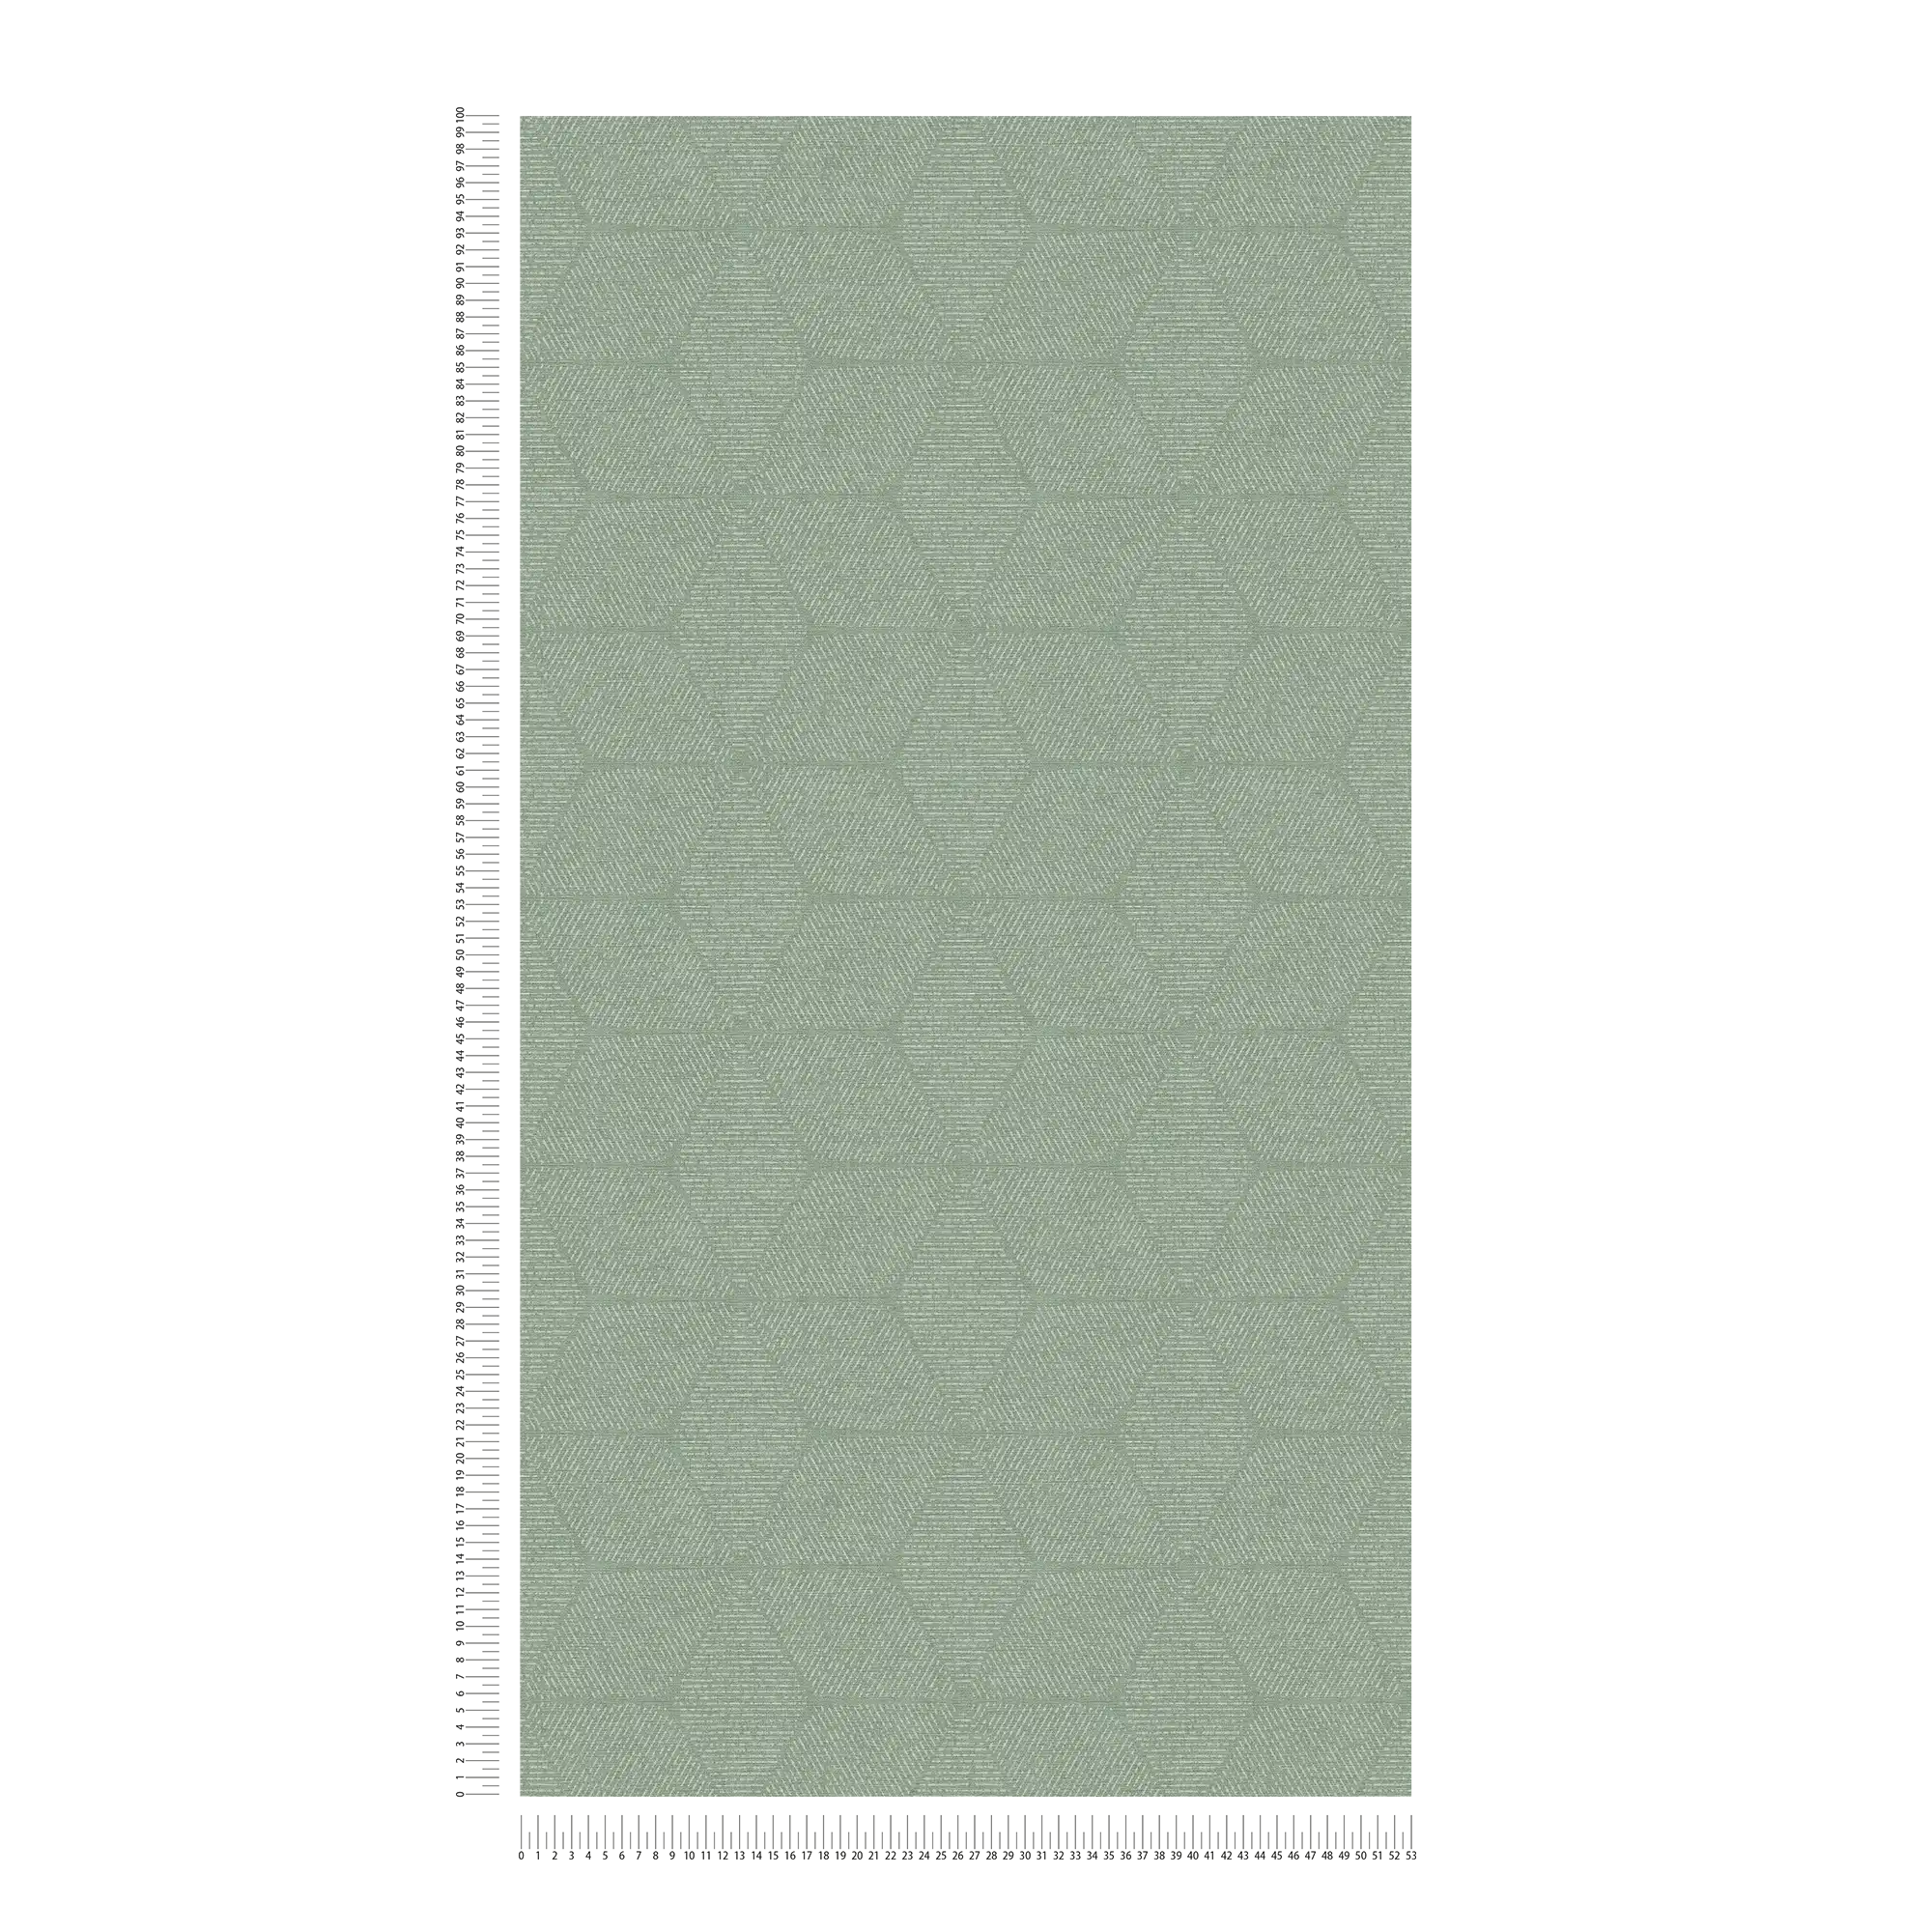             Non-woven wallpaper in floral pattern - green, white
        